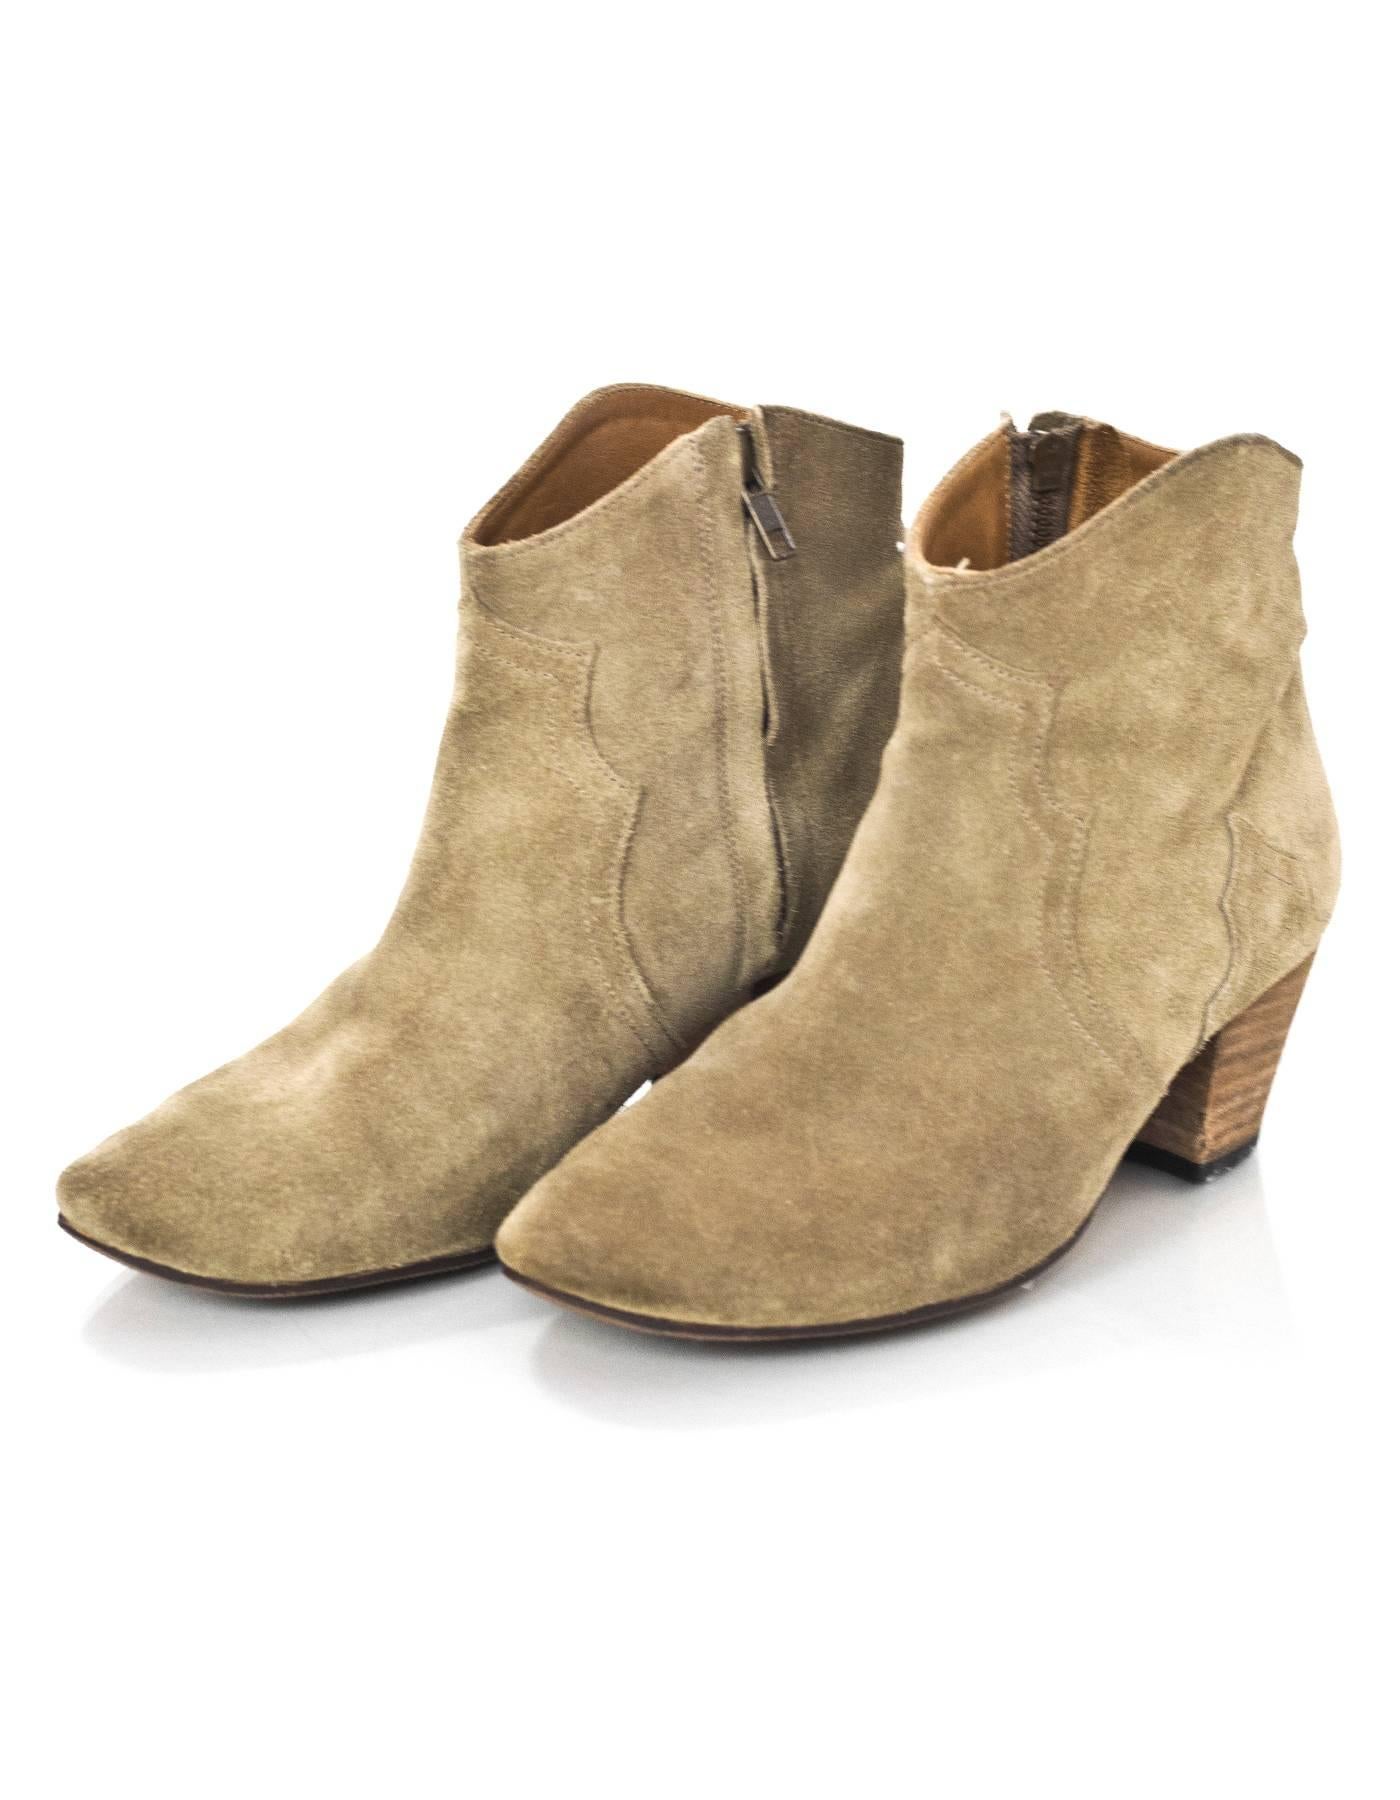 Etoile Isabel Marant Tan Suede The Dicker Ankle Boots Sz 37

Made In: France
Color: Beige
Materials: Suede
Closure/Opening: Zip closure at side
Sole Stamp: Isabel Marant Made in France
Retail Price: $560 + tax
Overall Condition: Very good pre-owned